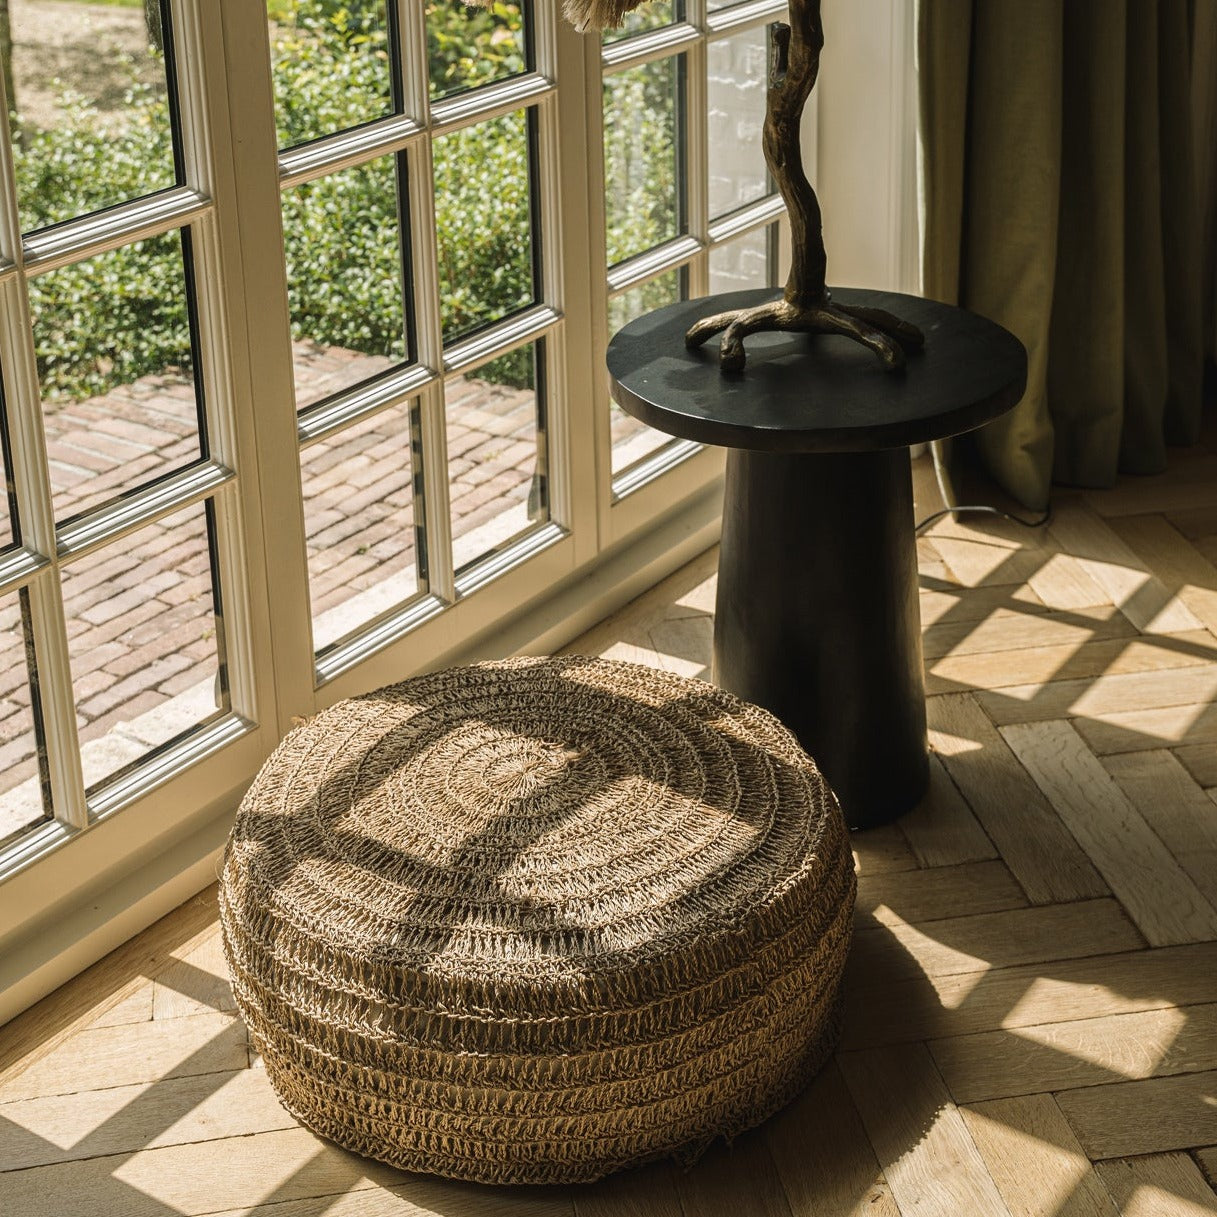 THE SEAGRASS Pouf